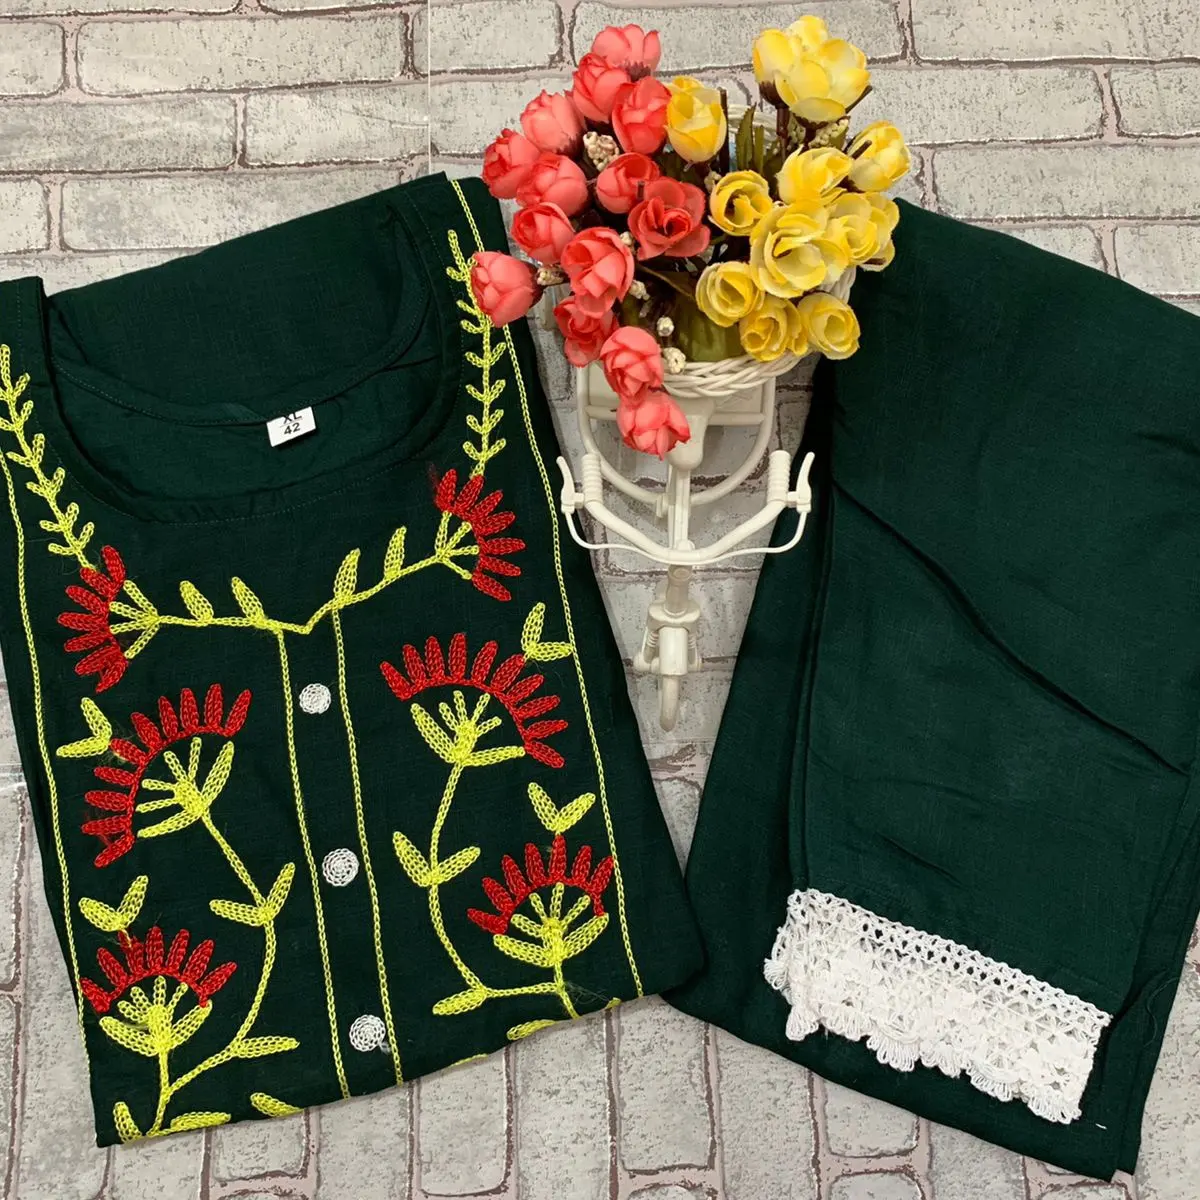 Post image I want to connect with suppliers of Kurta set. Below is the sample image of what I want. Chat with me if you sell these products.